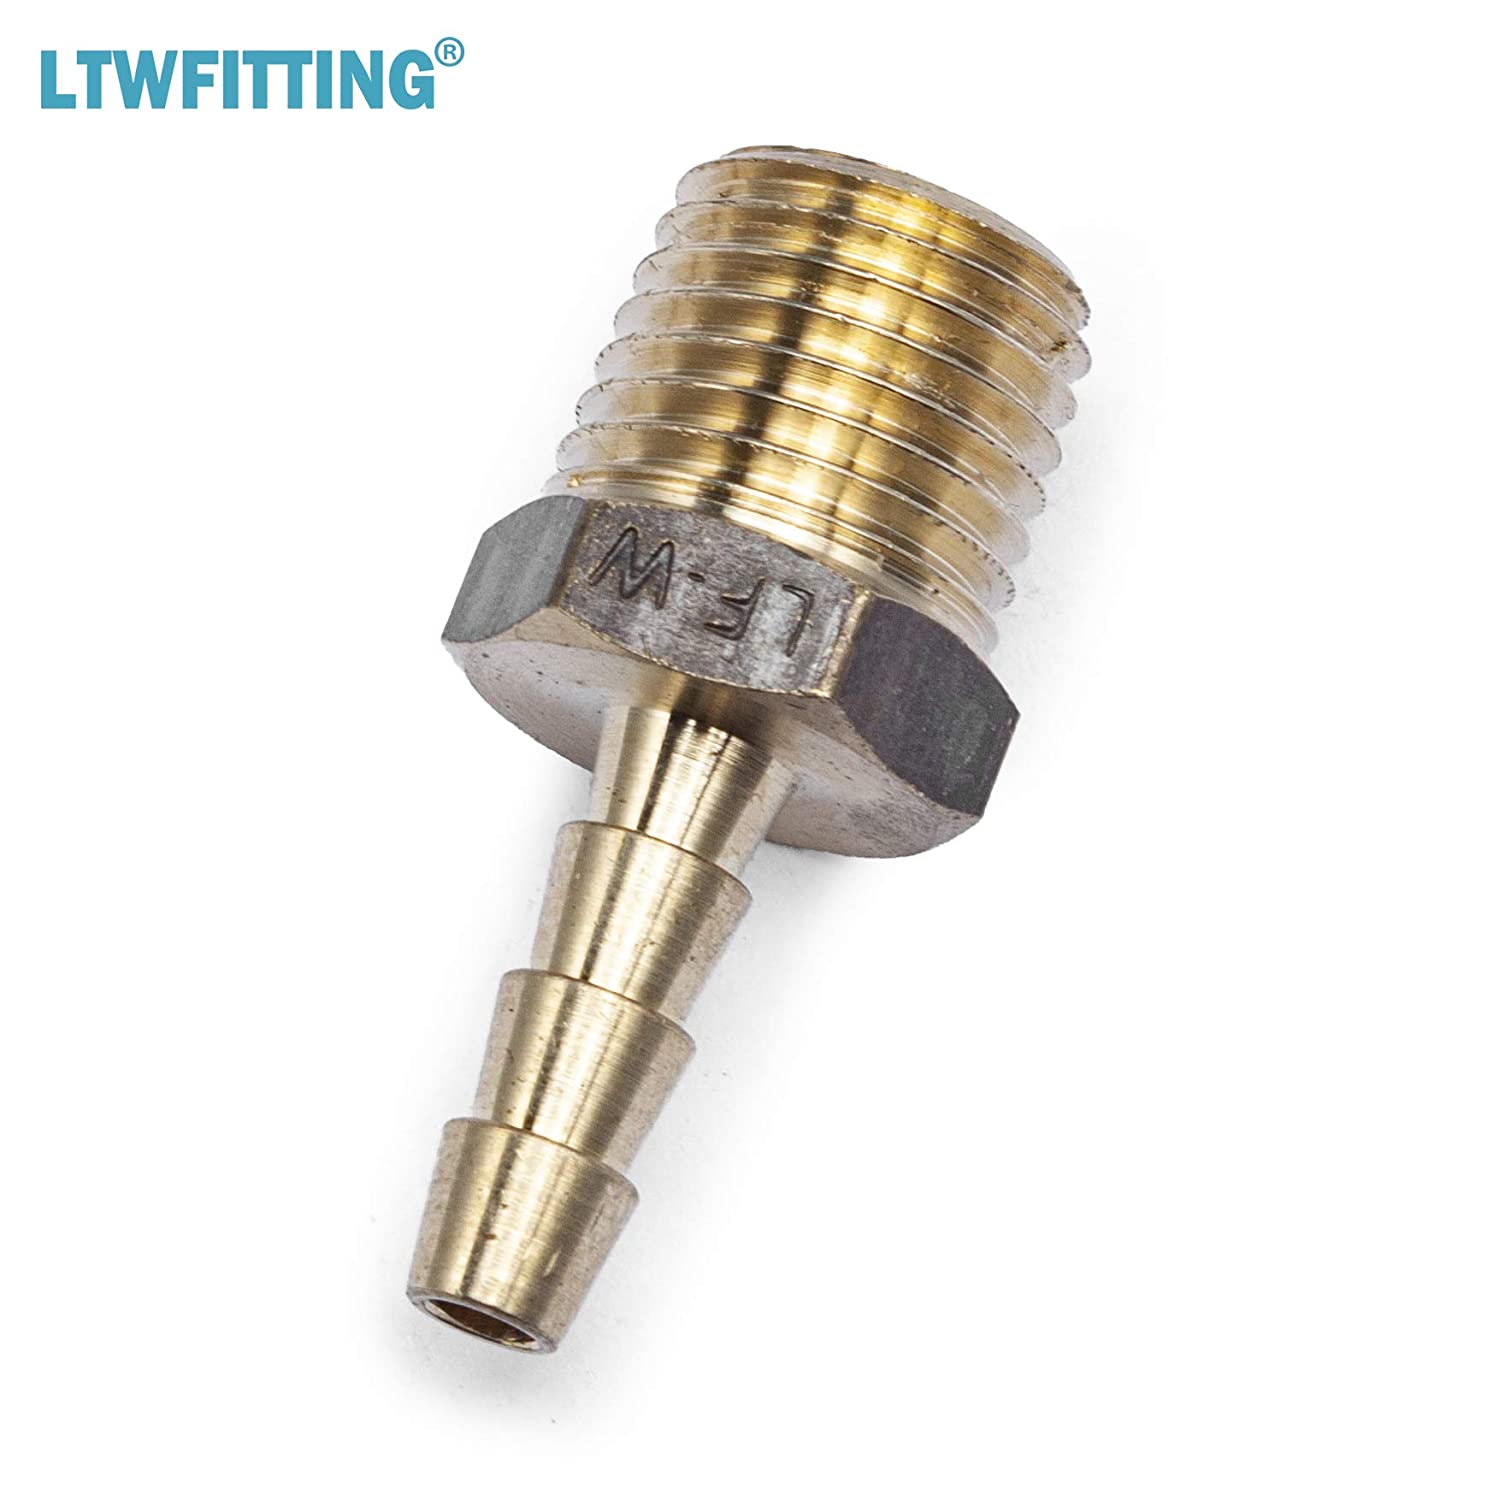 LTWFITTING Brass Fitting Coupler 3/16-Inch Hose Barb x 1/4-Inch Male NPT Fuel Gas Water(Pack of 5)